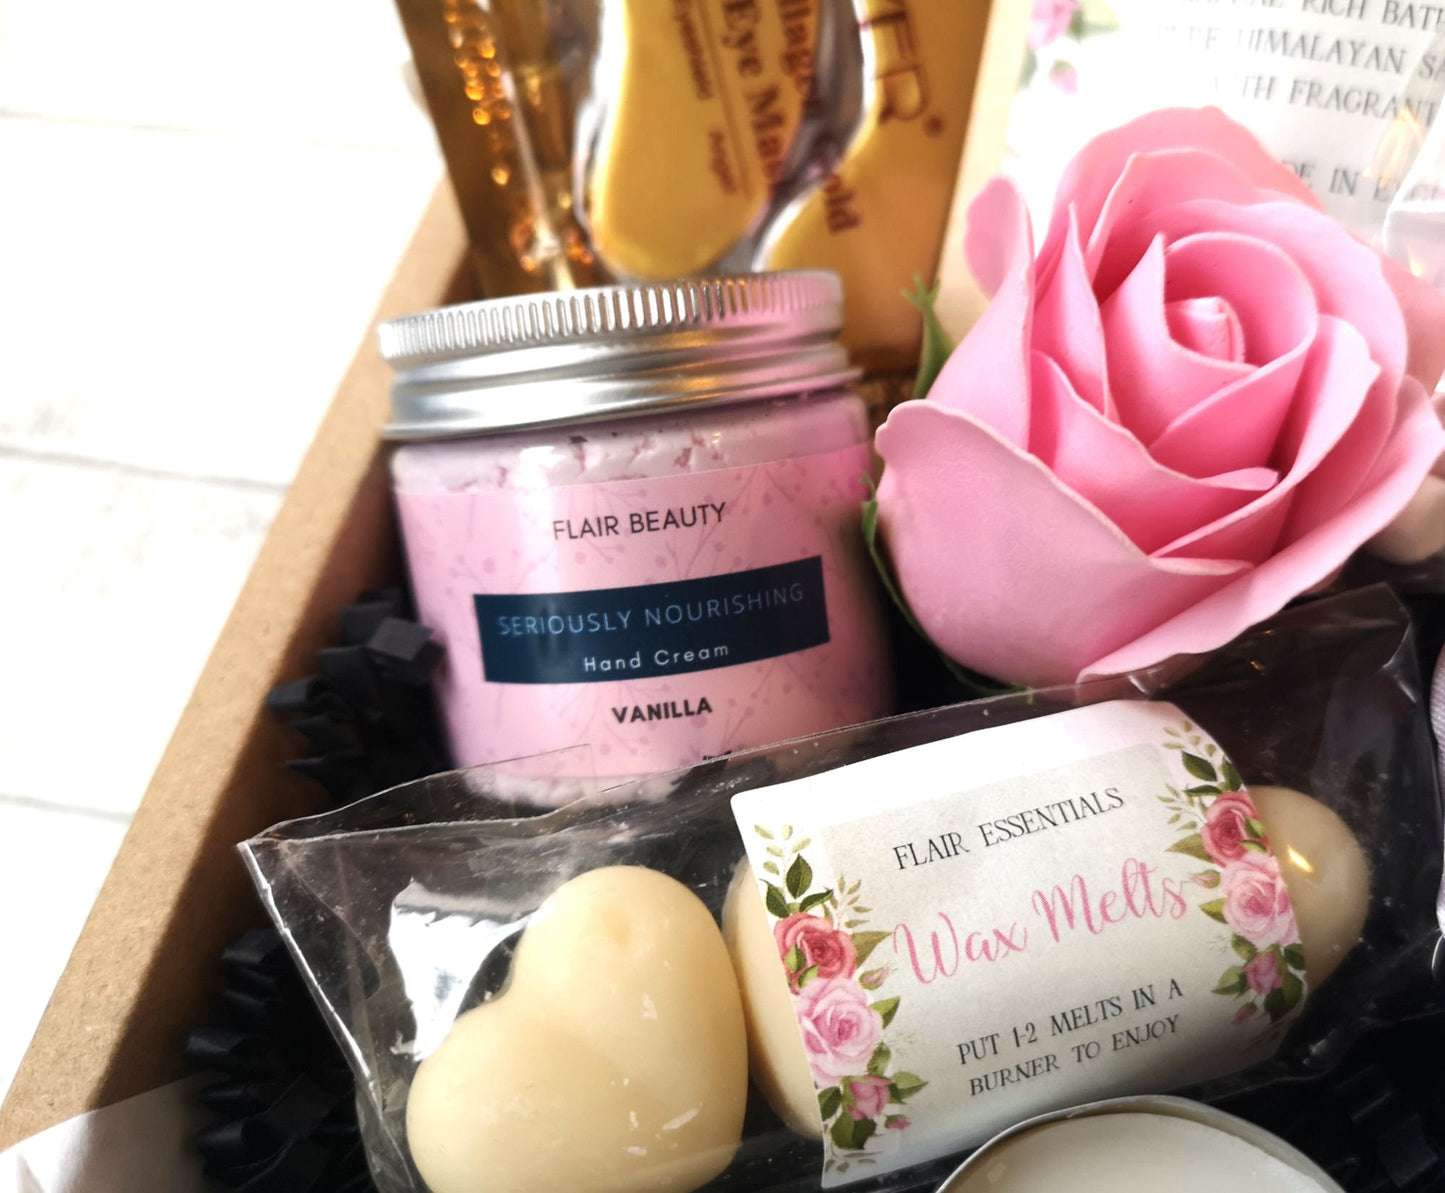 Mother's Day Gift Hug in a Box Self Care Package, Lavender Pamper Gift Box for Her, Hygge Gift,  Wax Burner